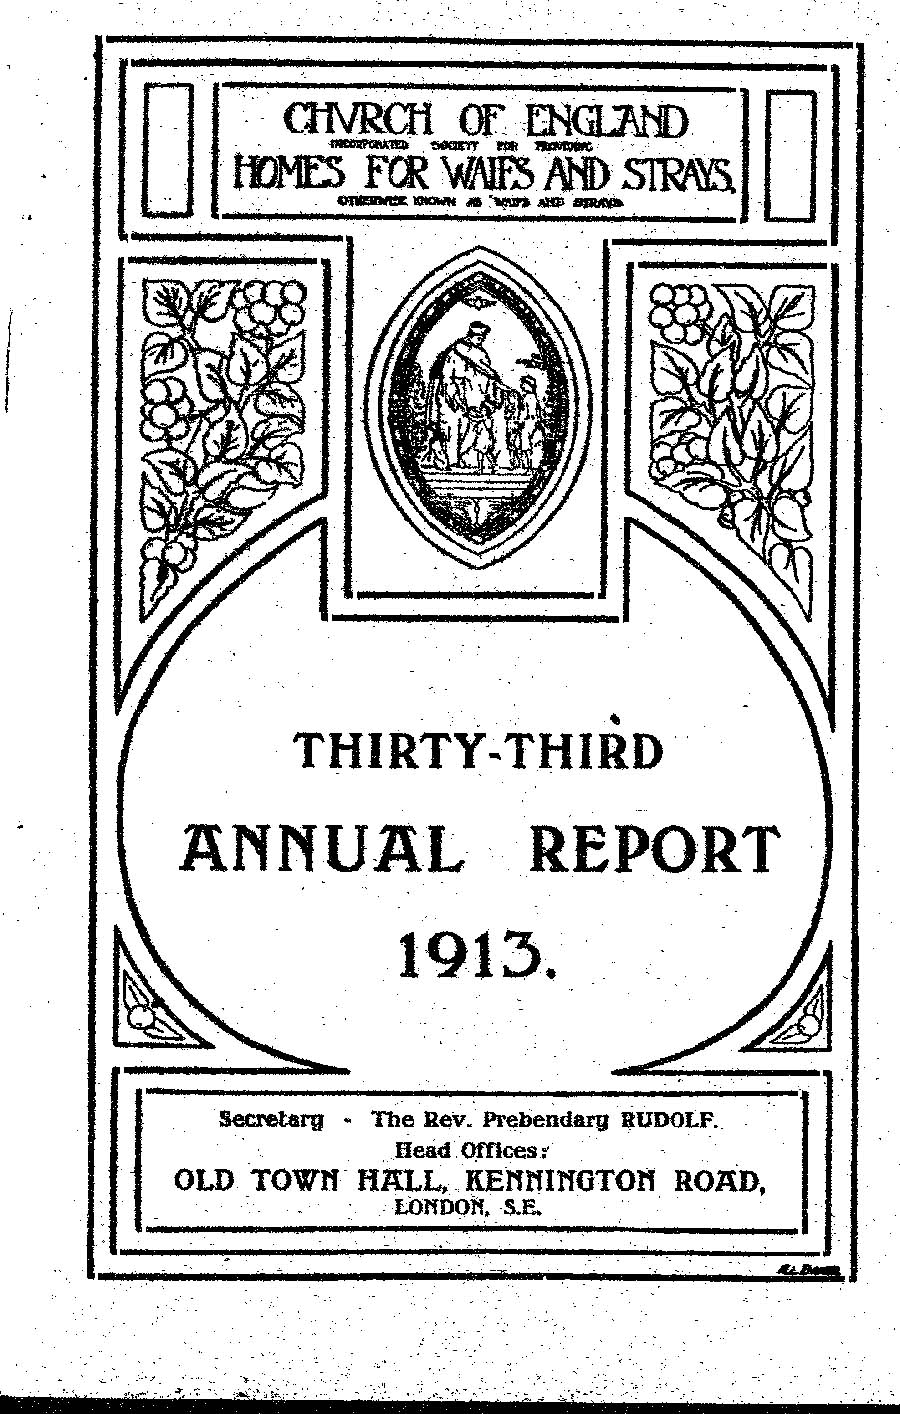 Annual Report 1913 - page 1